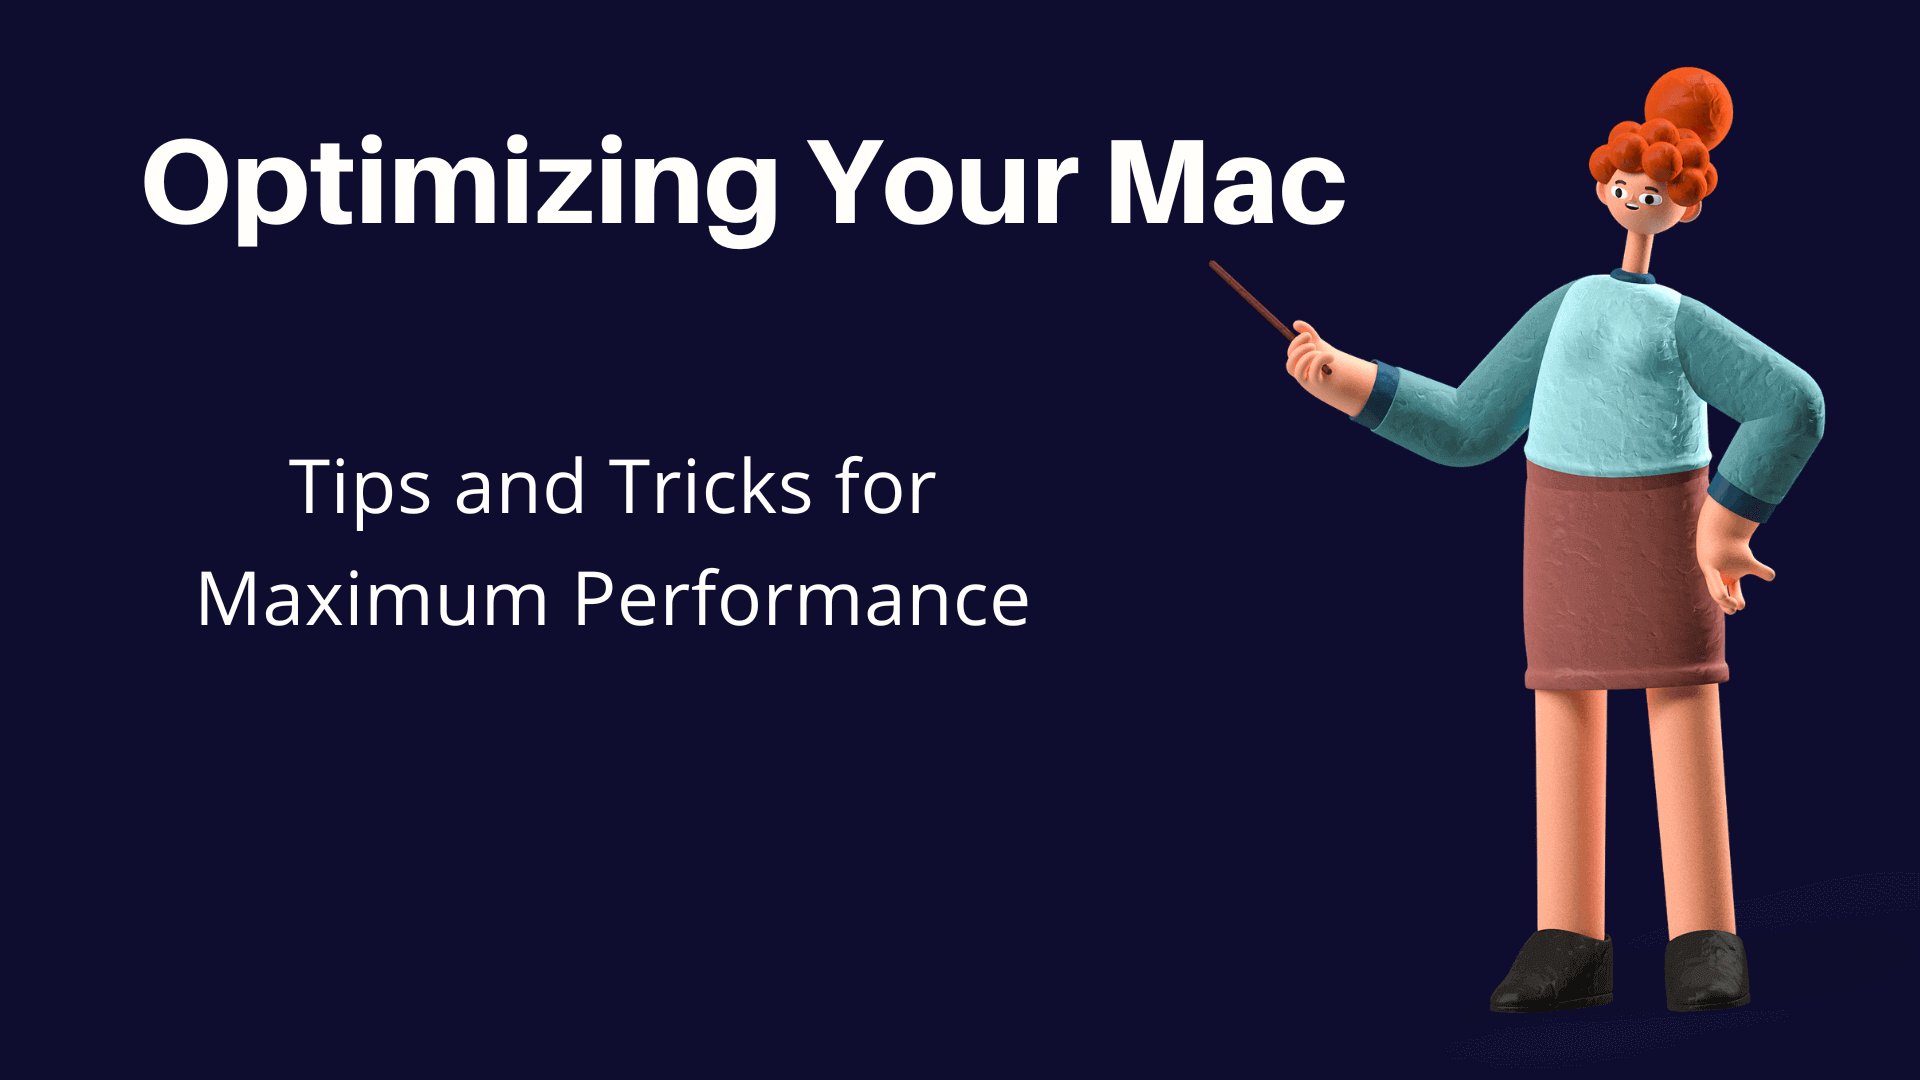 Maximizing Performance Tips and Tricks for Optimizing Your Mac After